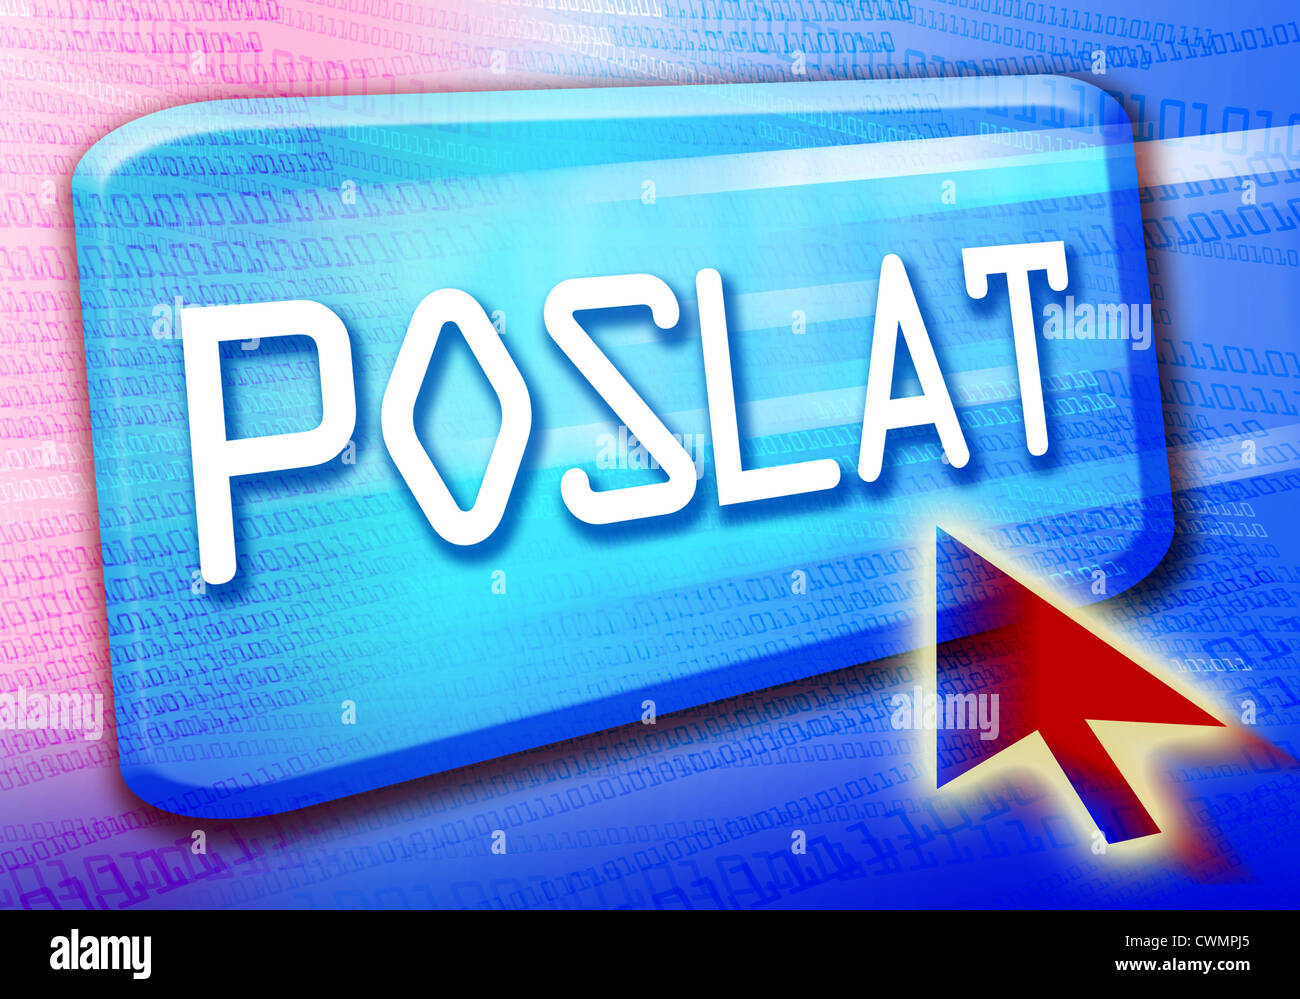 Poslat  - on-line shopping - Czech business and commerce Stock Photo